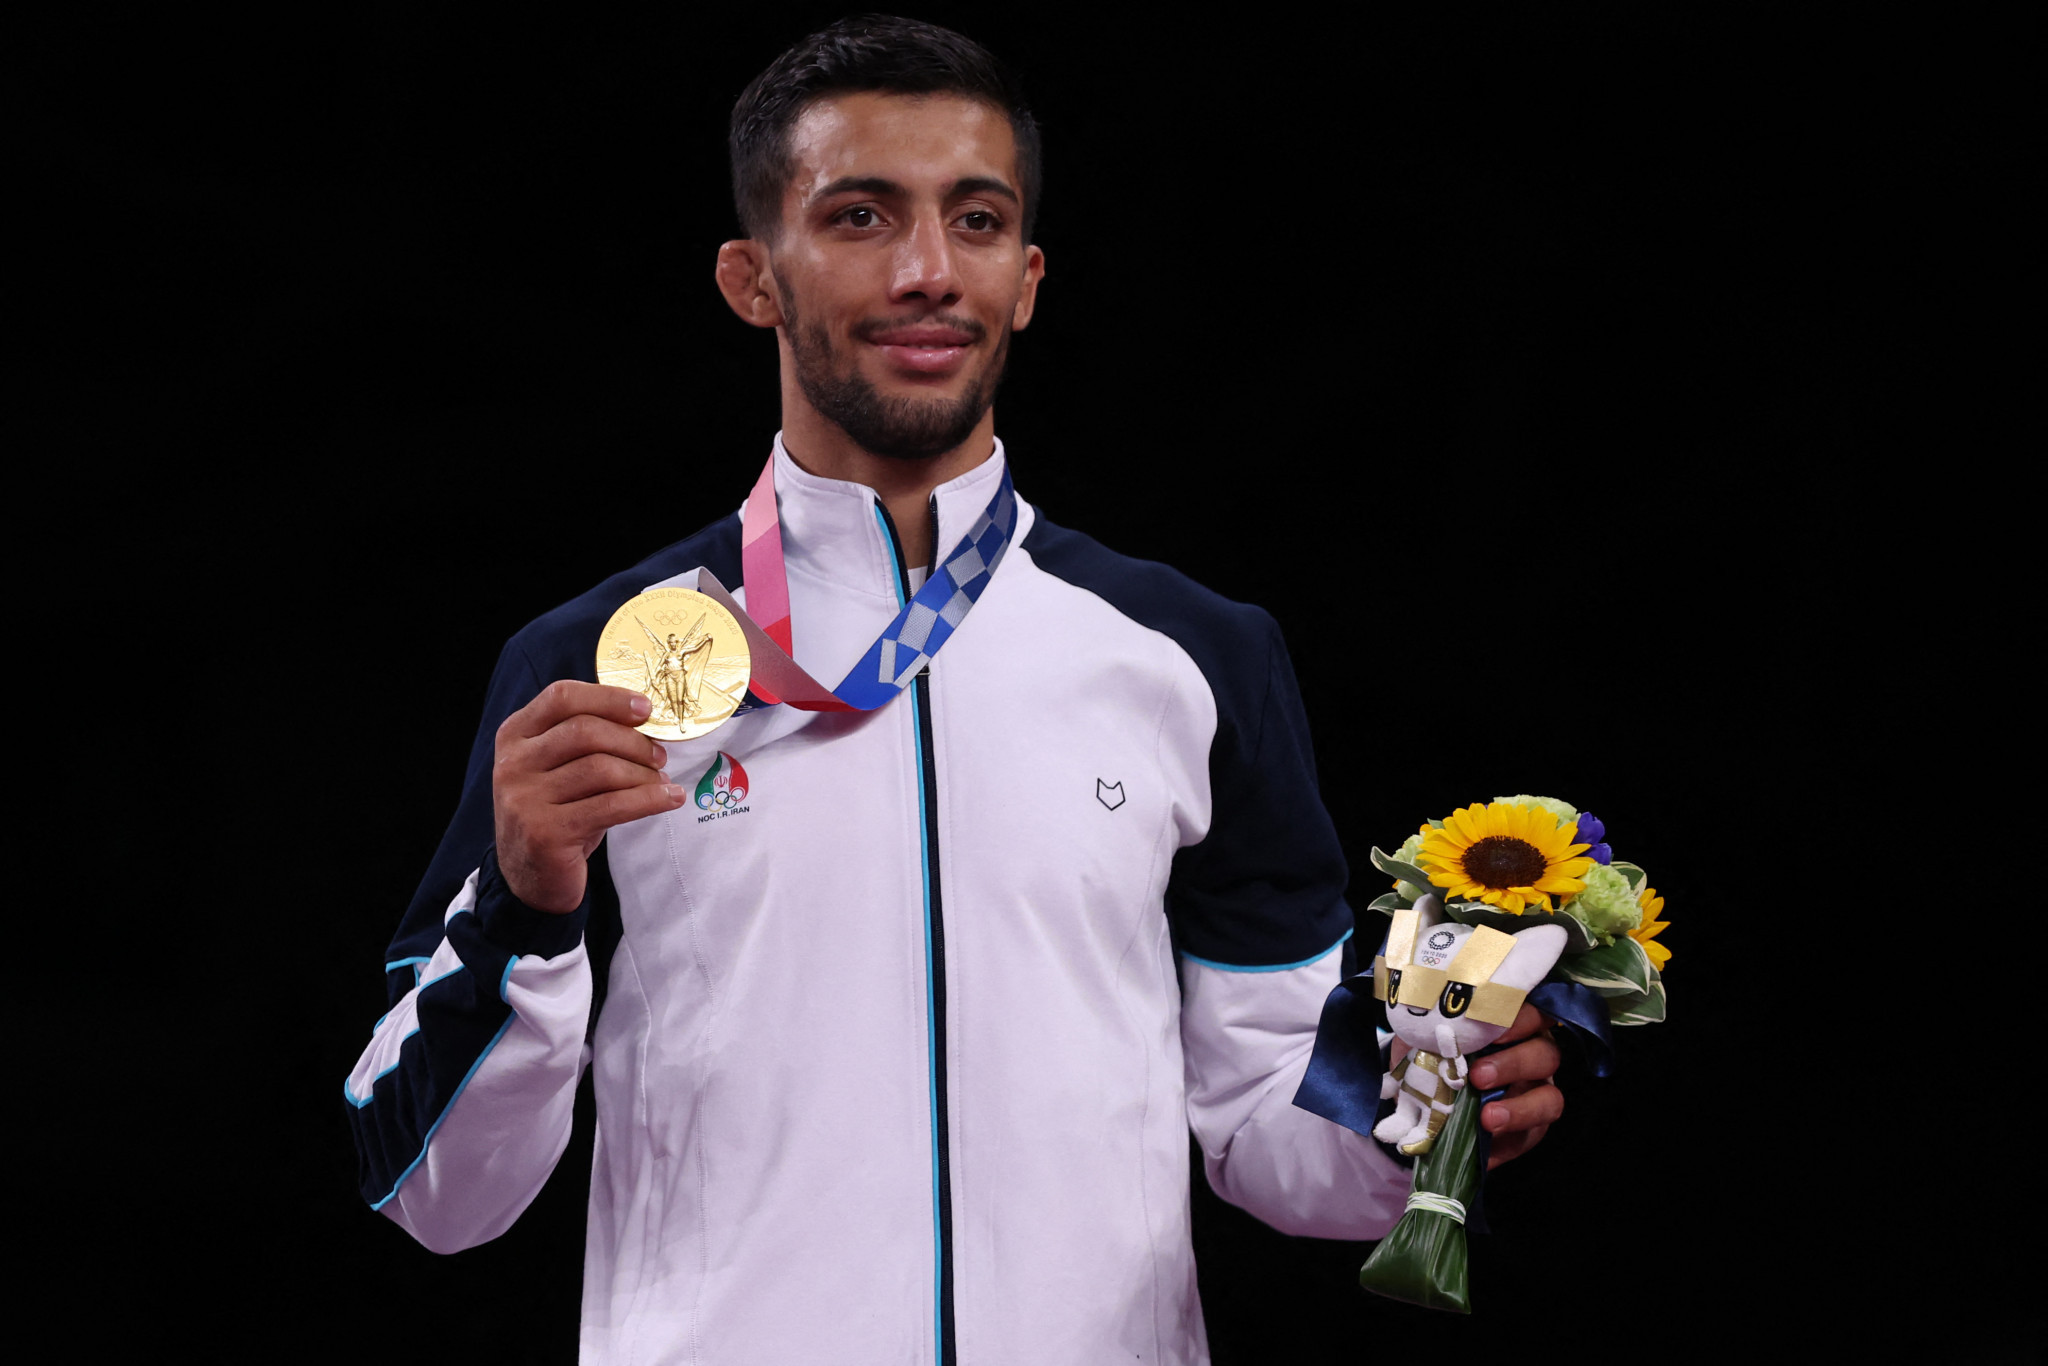 The bottle-throwing incident happened during a fight involving Mohammadali Geraei's brother Mohammadreza Geraei, reigning Olympic champion in the under-67kg category ©Getty Images